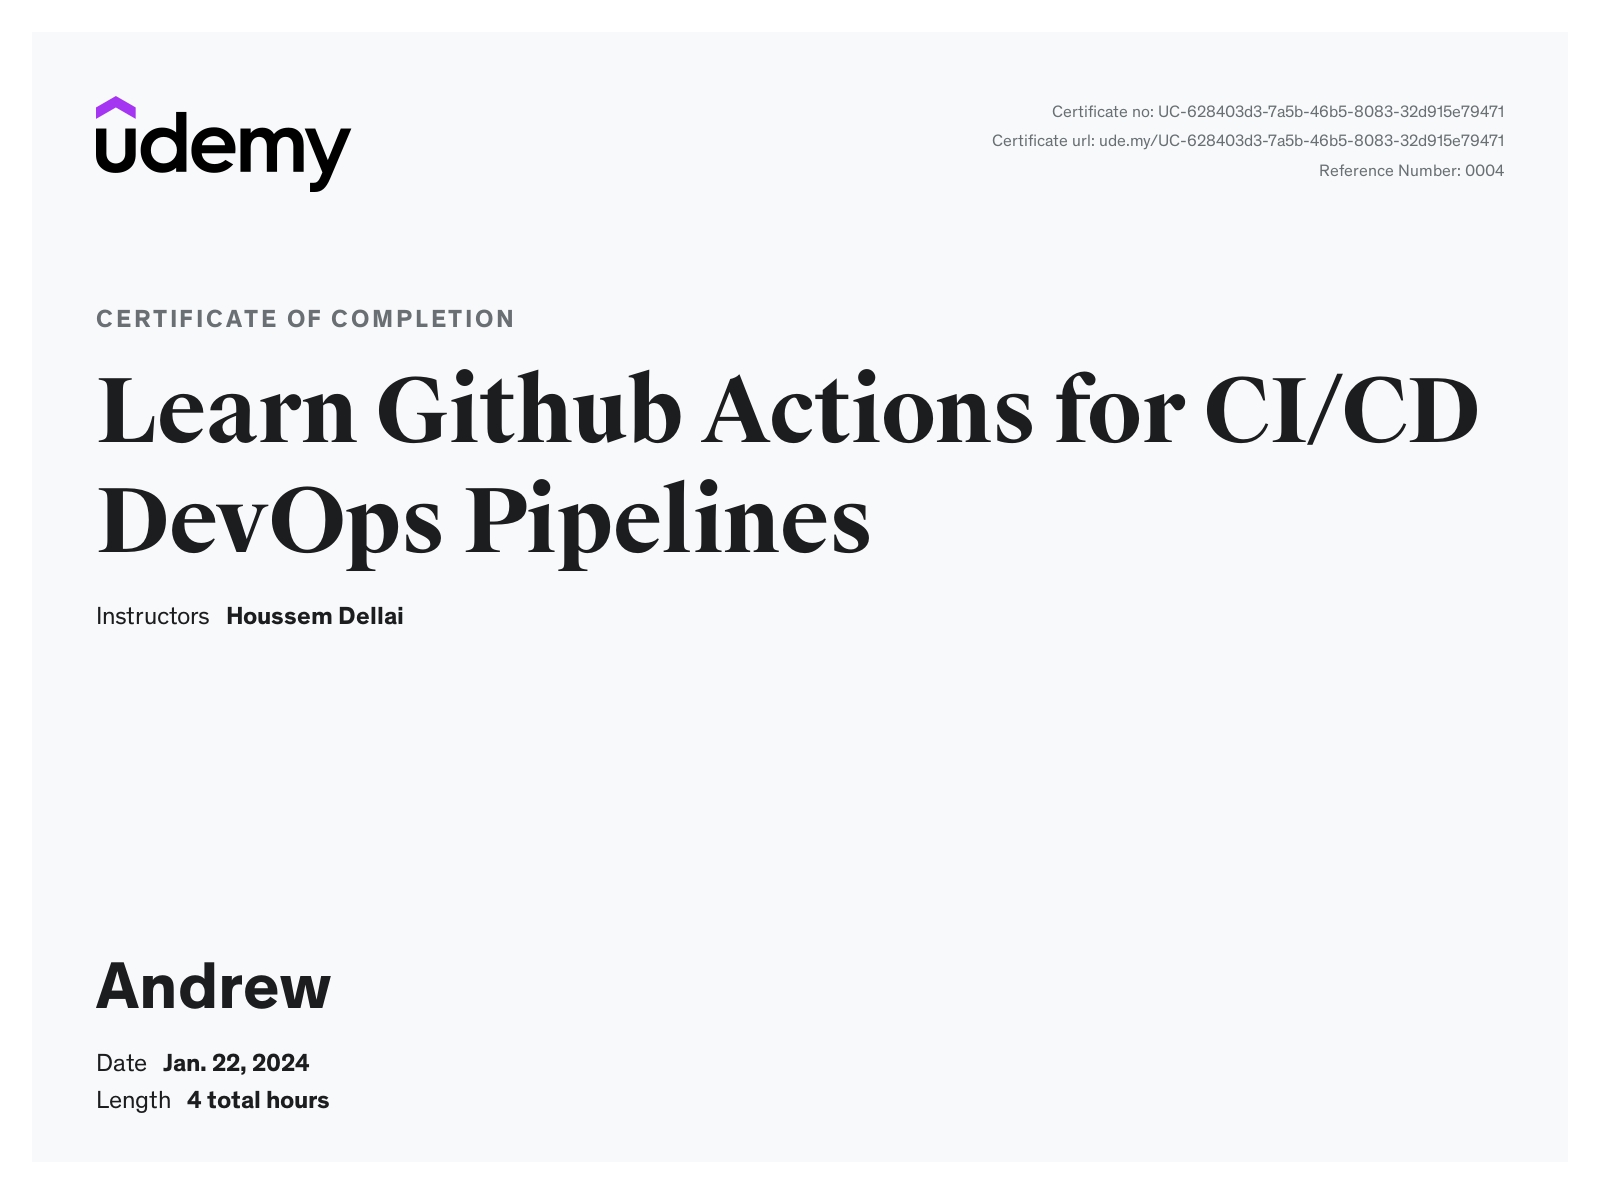 Learn Github Actions for CI/CD DevOps Pipelines Completion Certificate